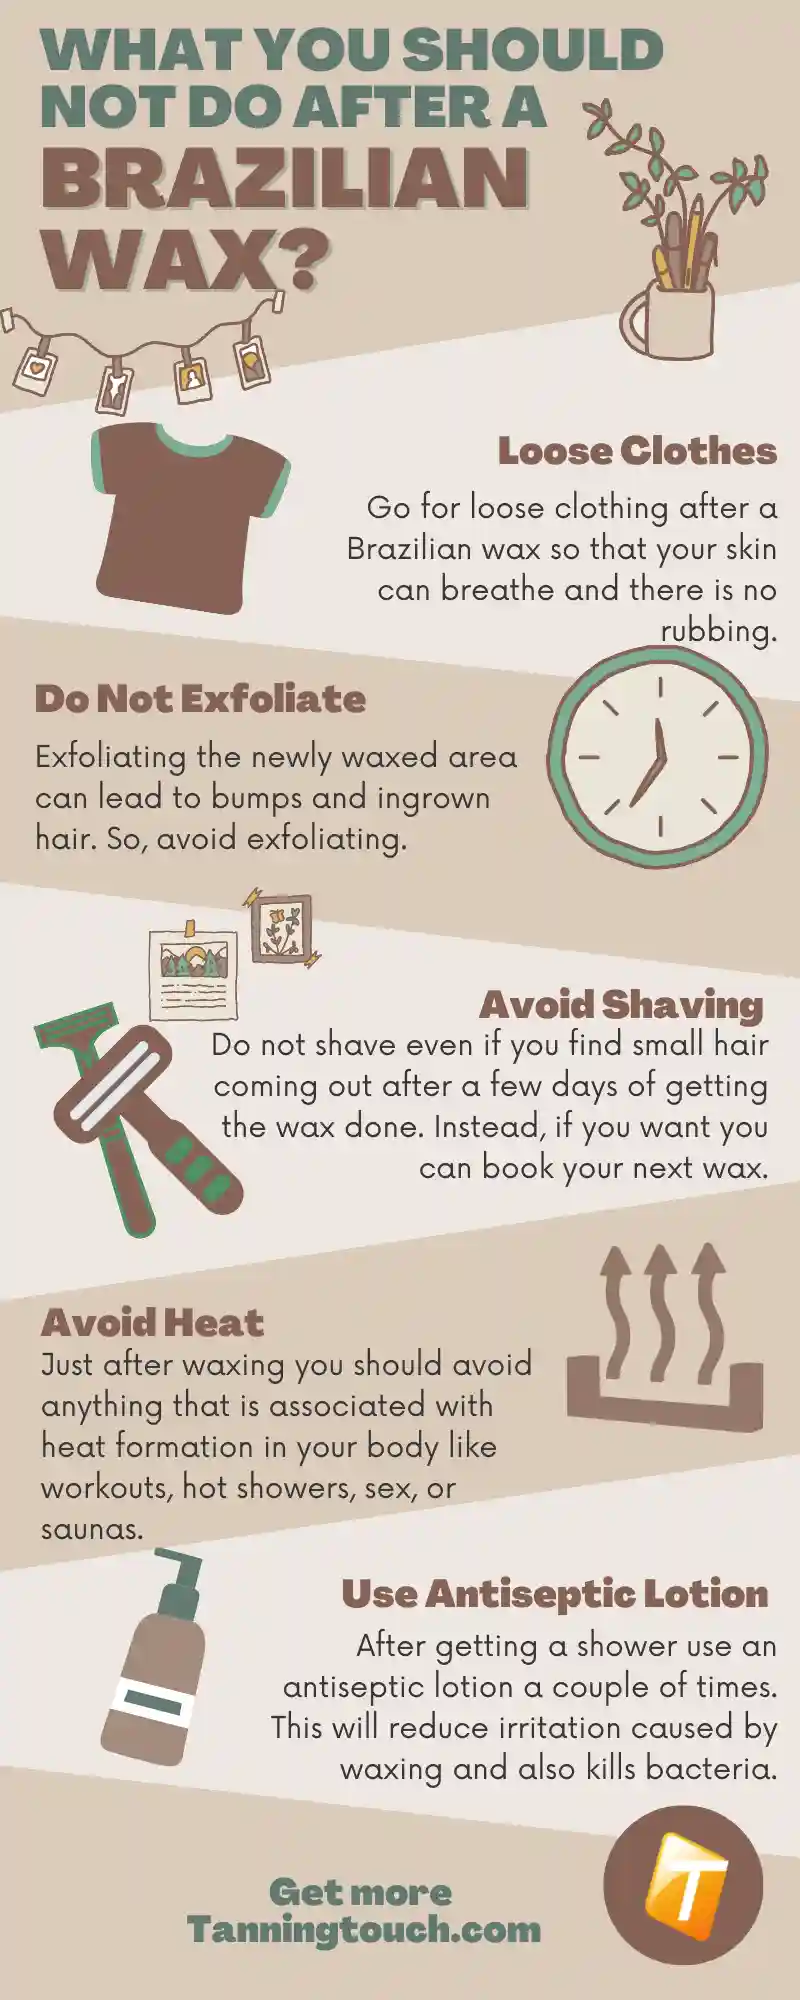 After a Brazilian Wax Tips Infographic